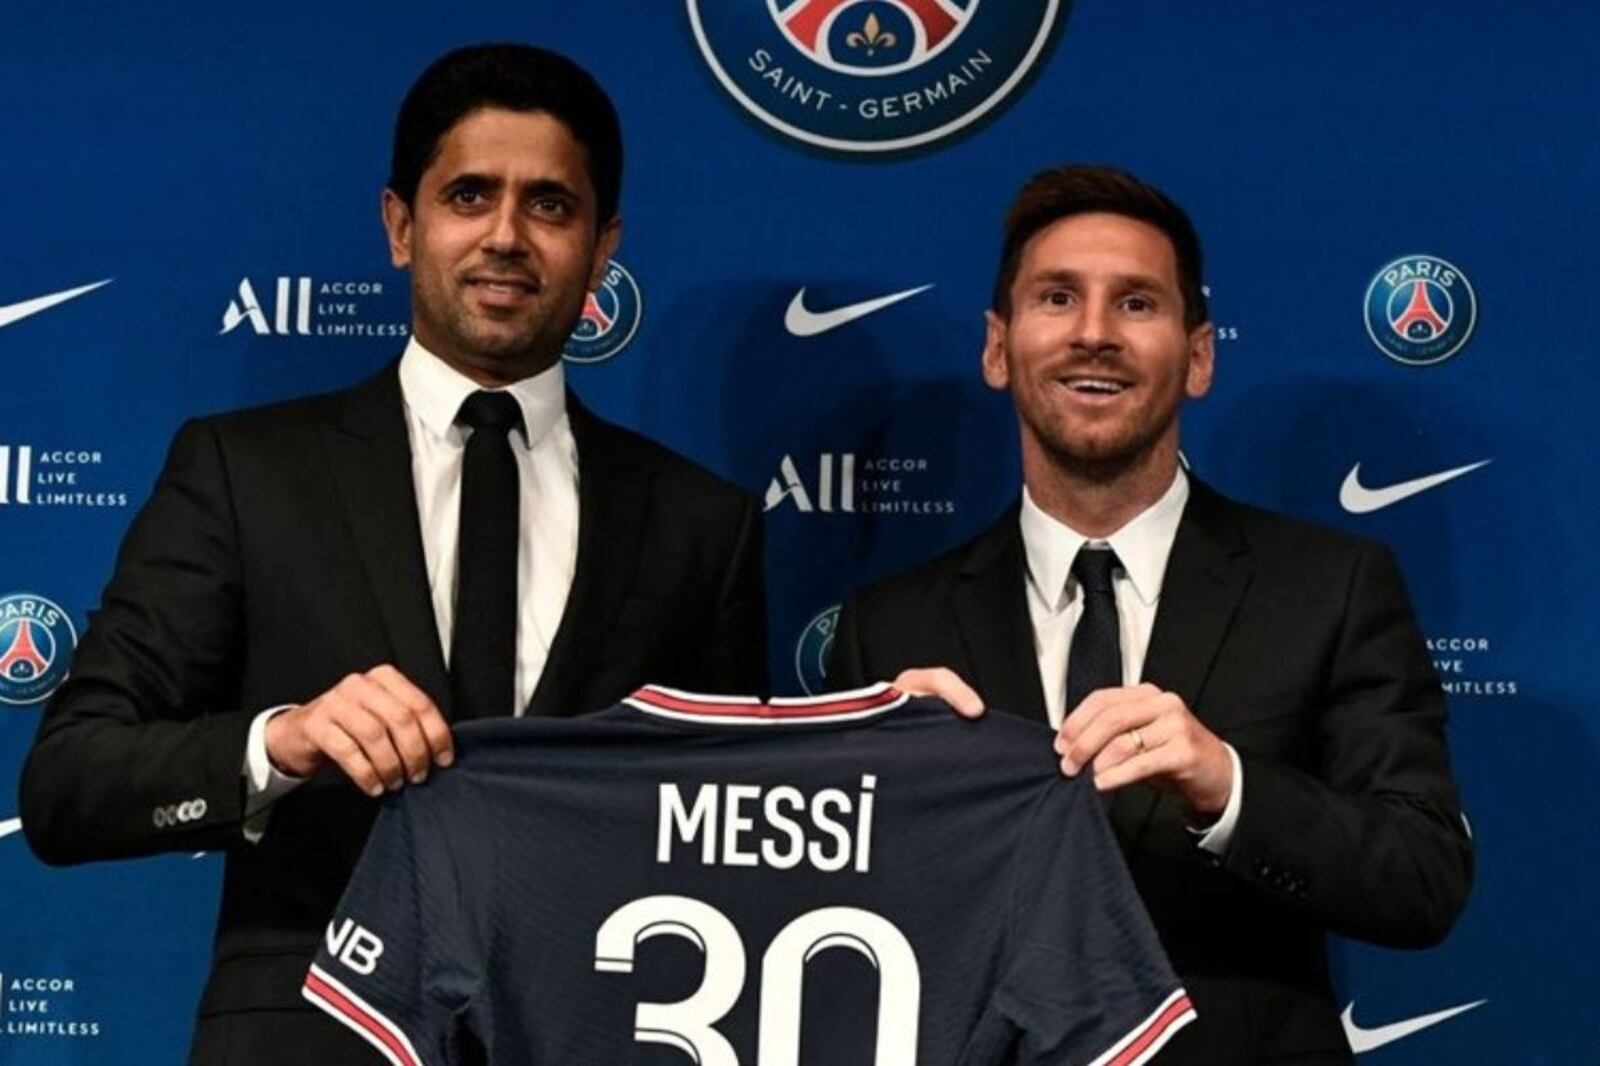 While Chelsea would pay millions for Neymar, Messi's decision whether to leave PSG or not